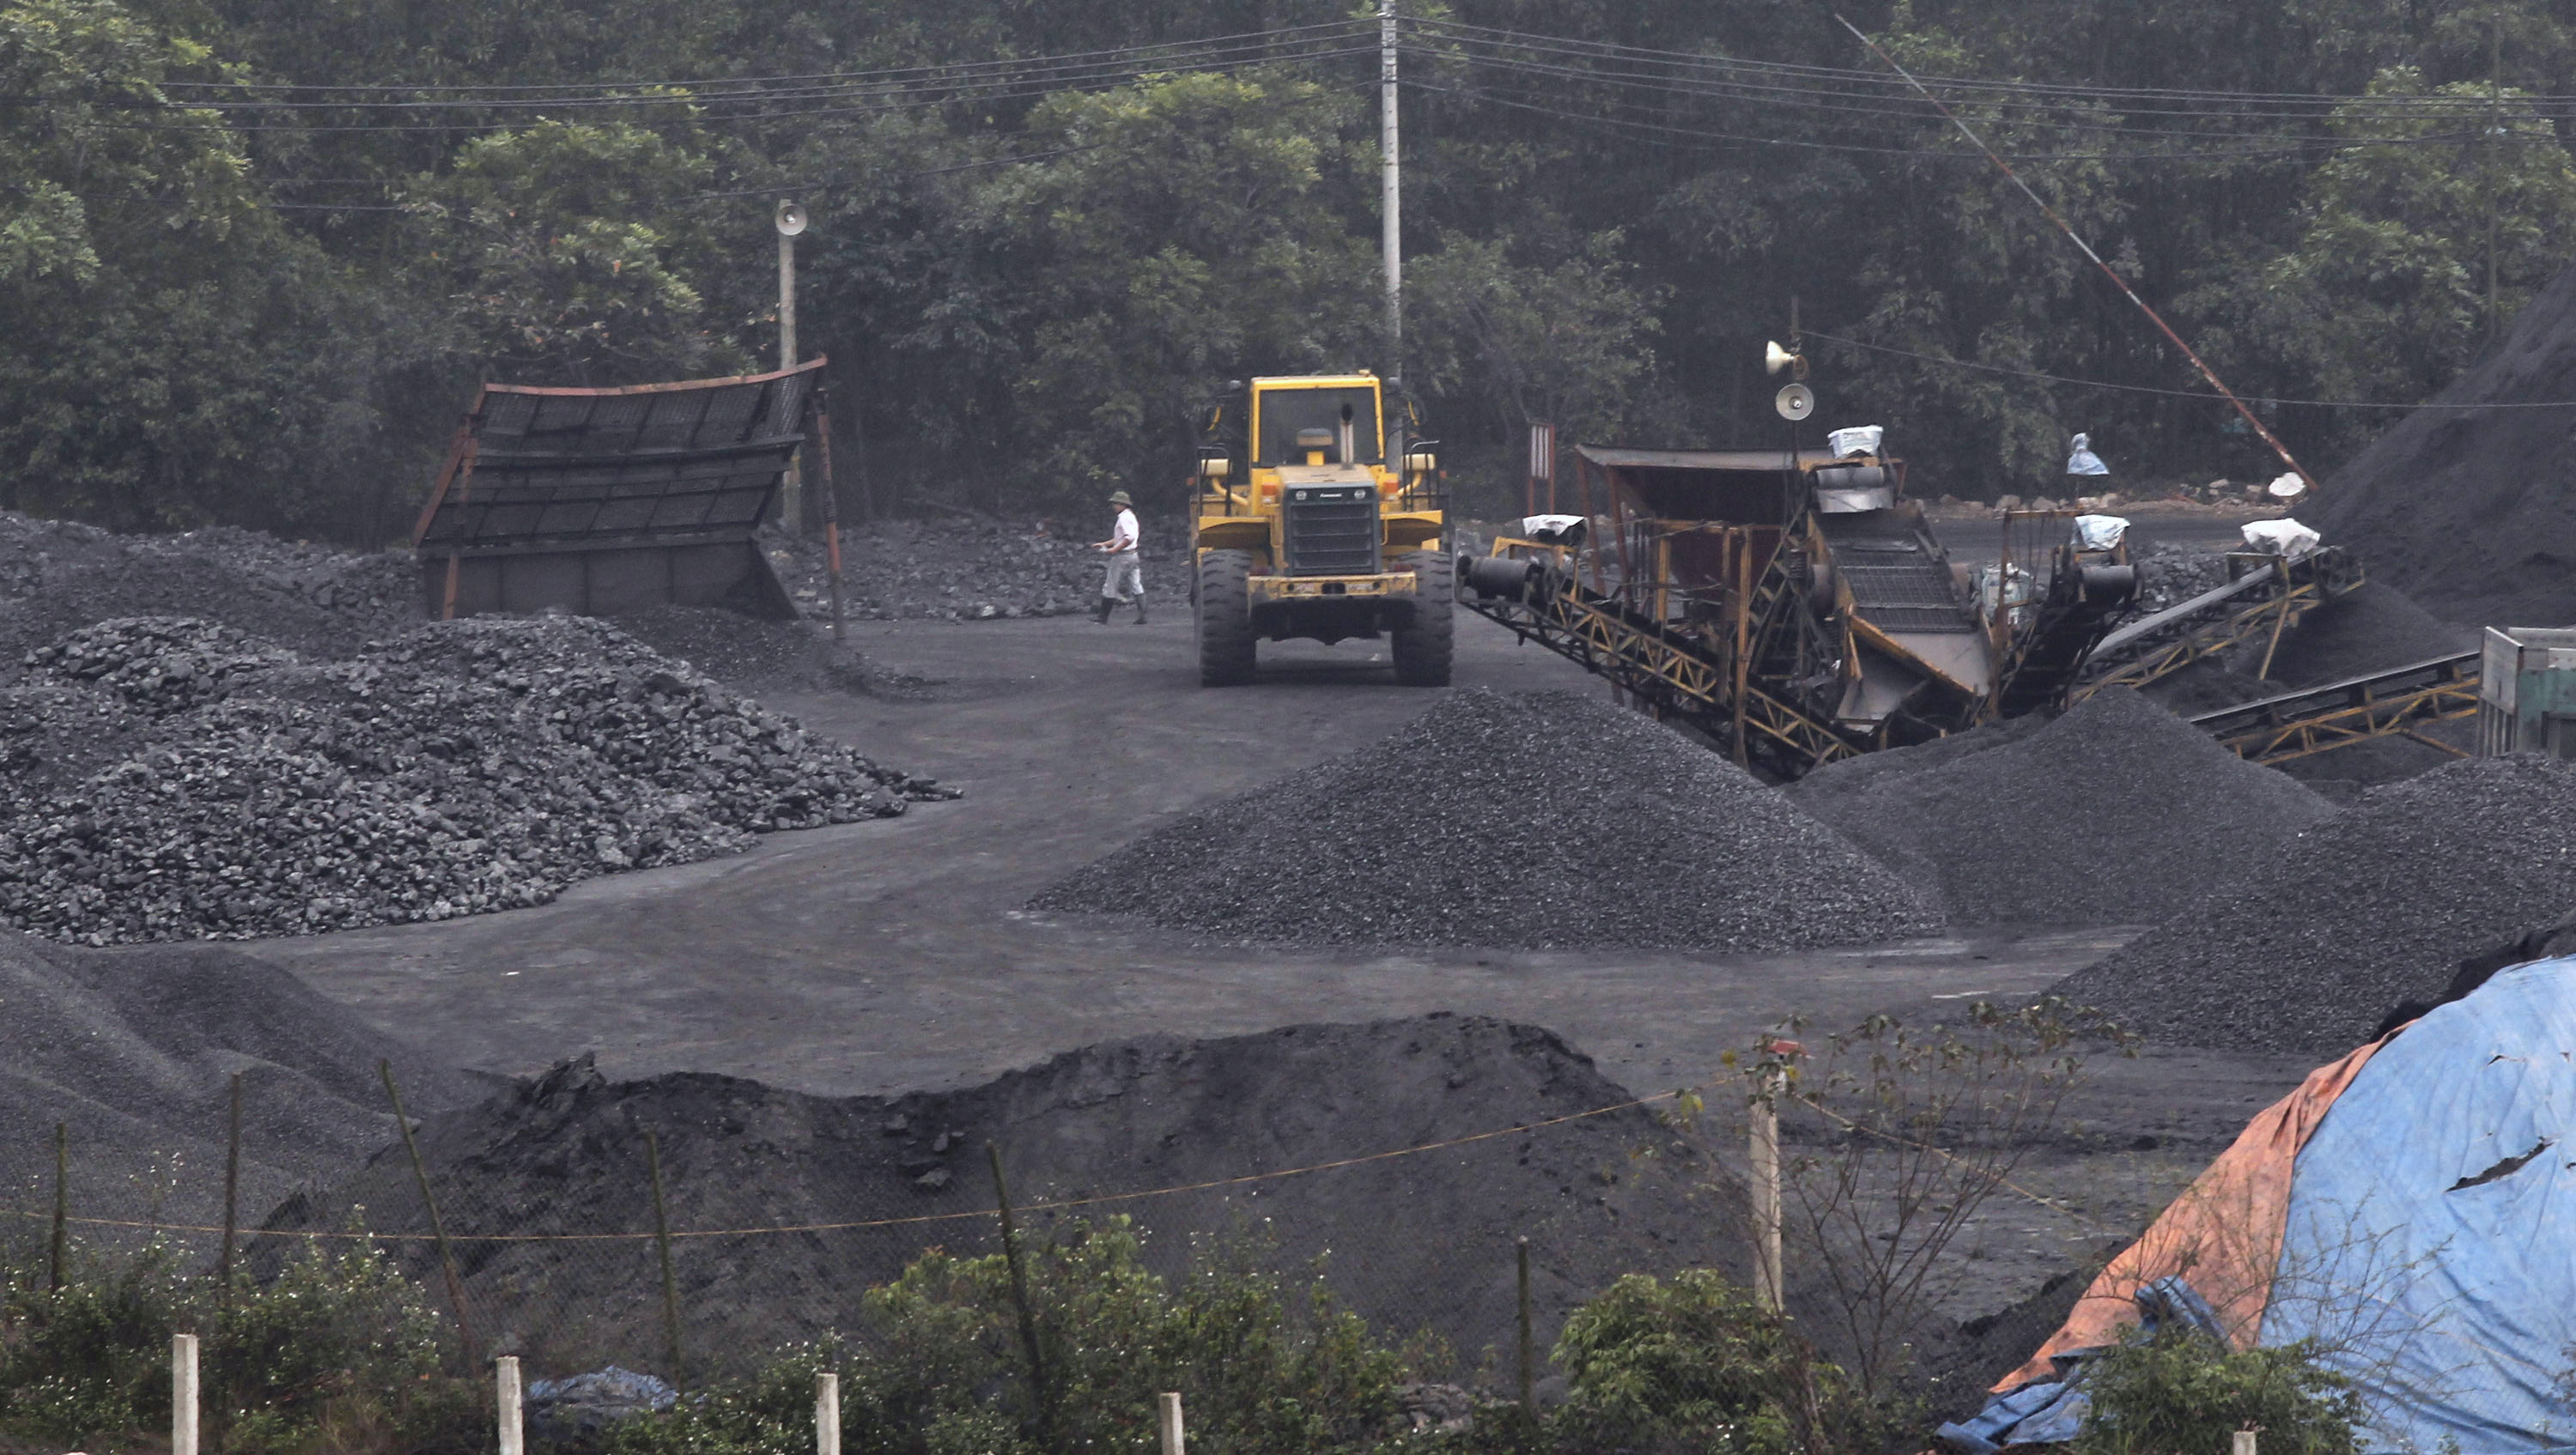 Workers walk near an excavator loading coal onto a truck at a coal port in Hanoi